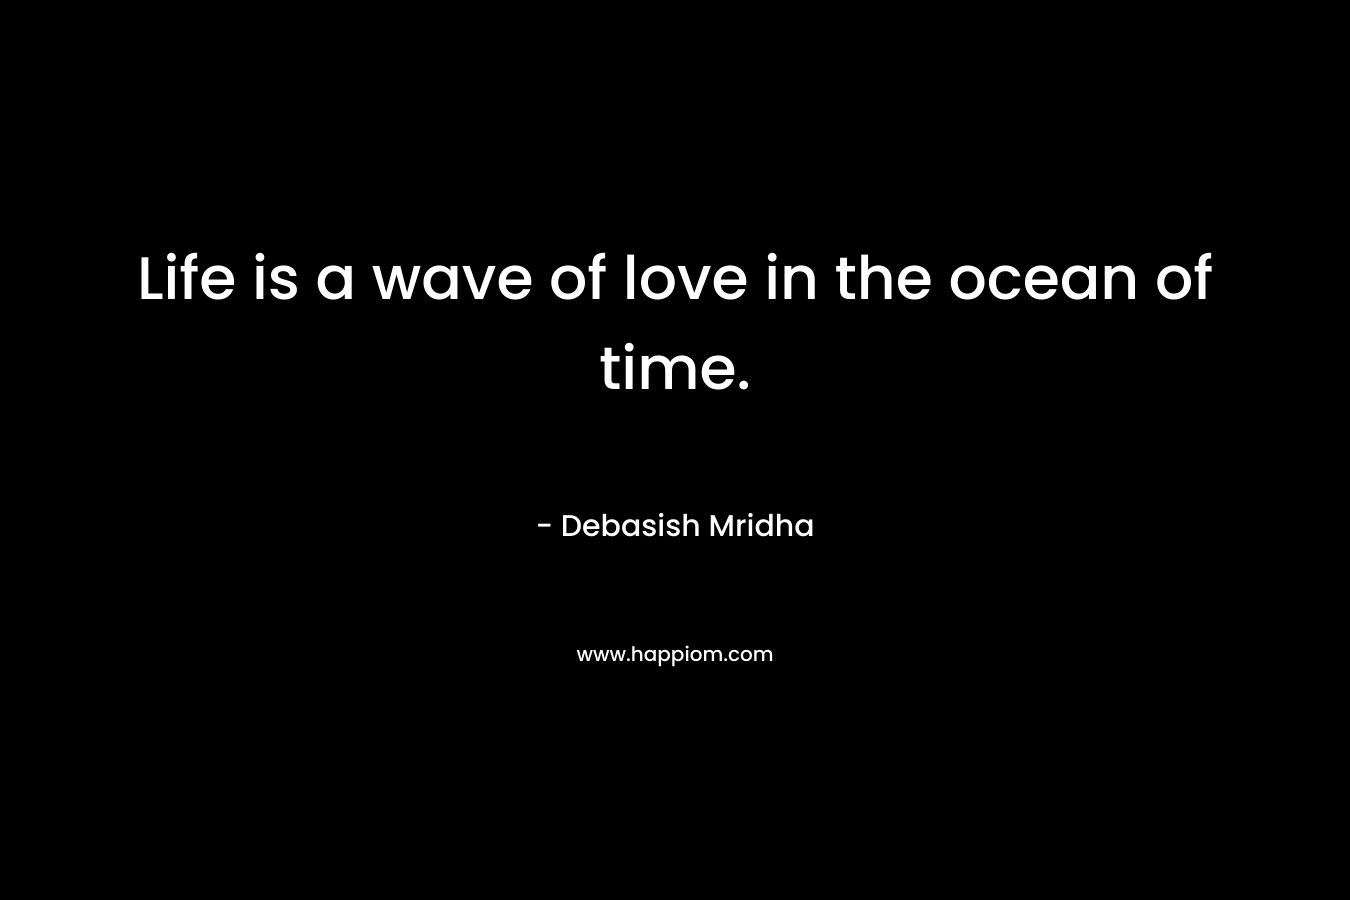 Life is a wave of love in the ocean of time.